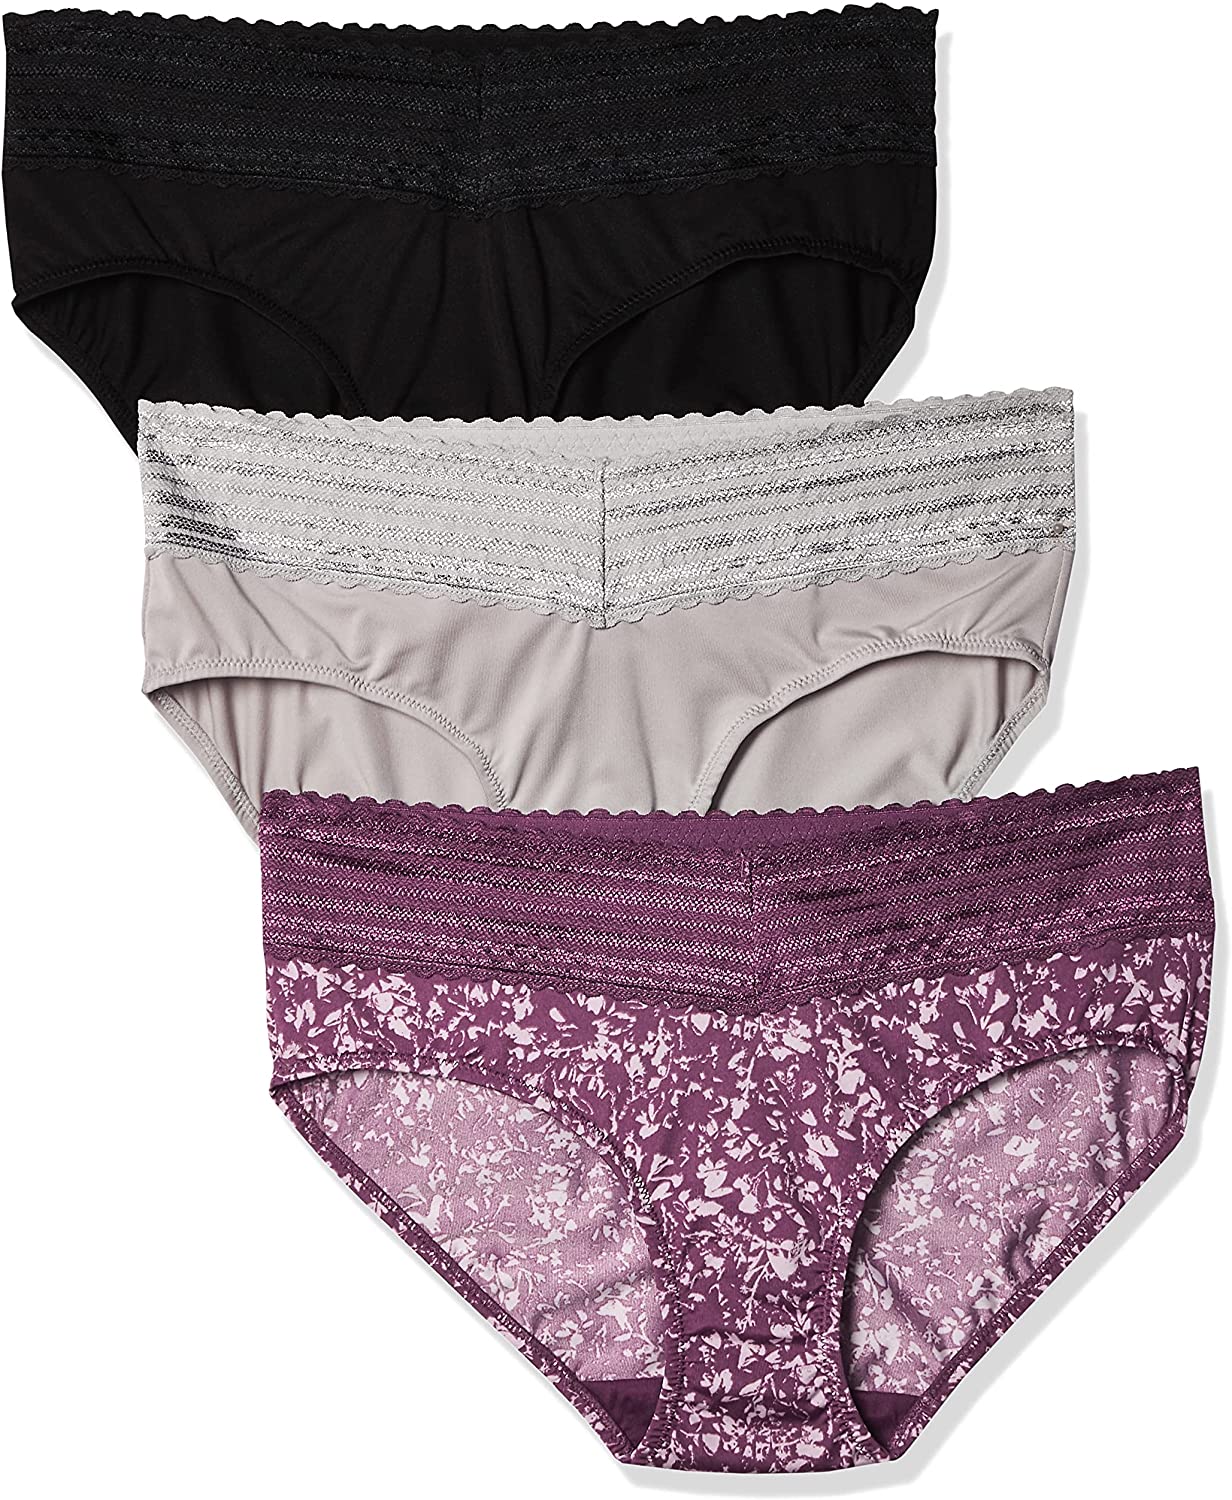 Buy Secret Treasures Intimates Women's 3pk All Lace Hipster Panties (Lilac,  Hot Pink, Navy, Large (7)) at